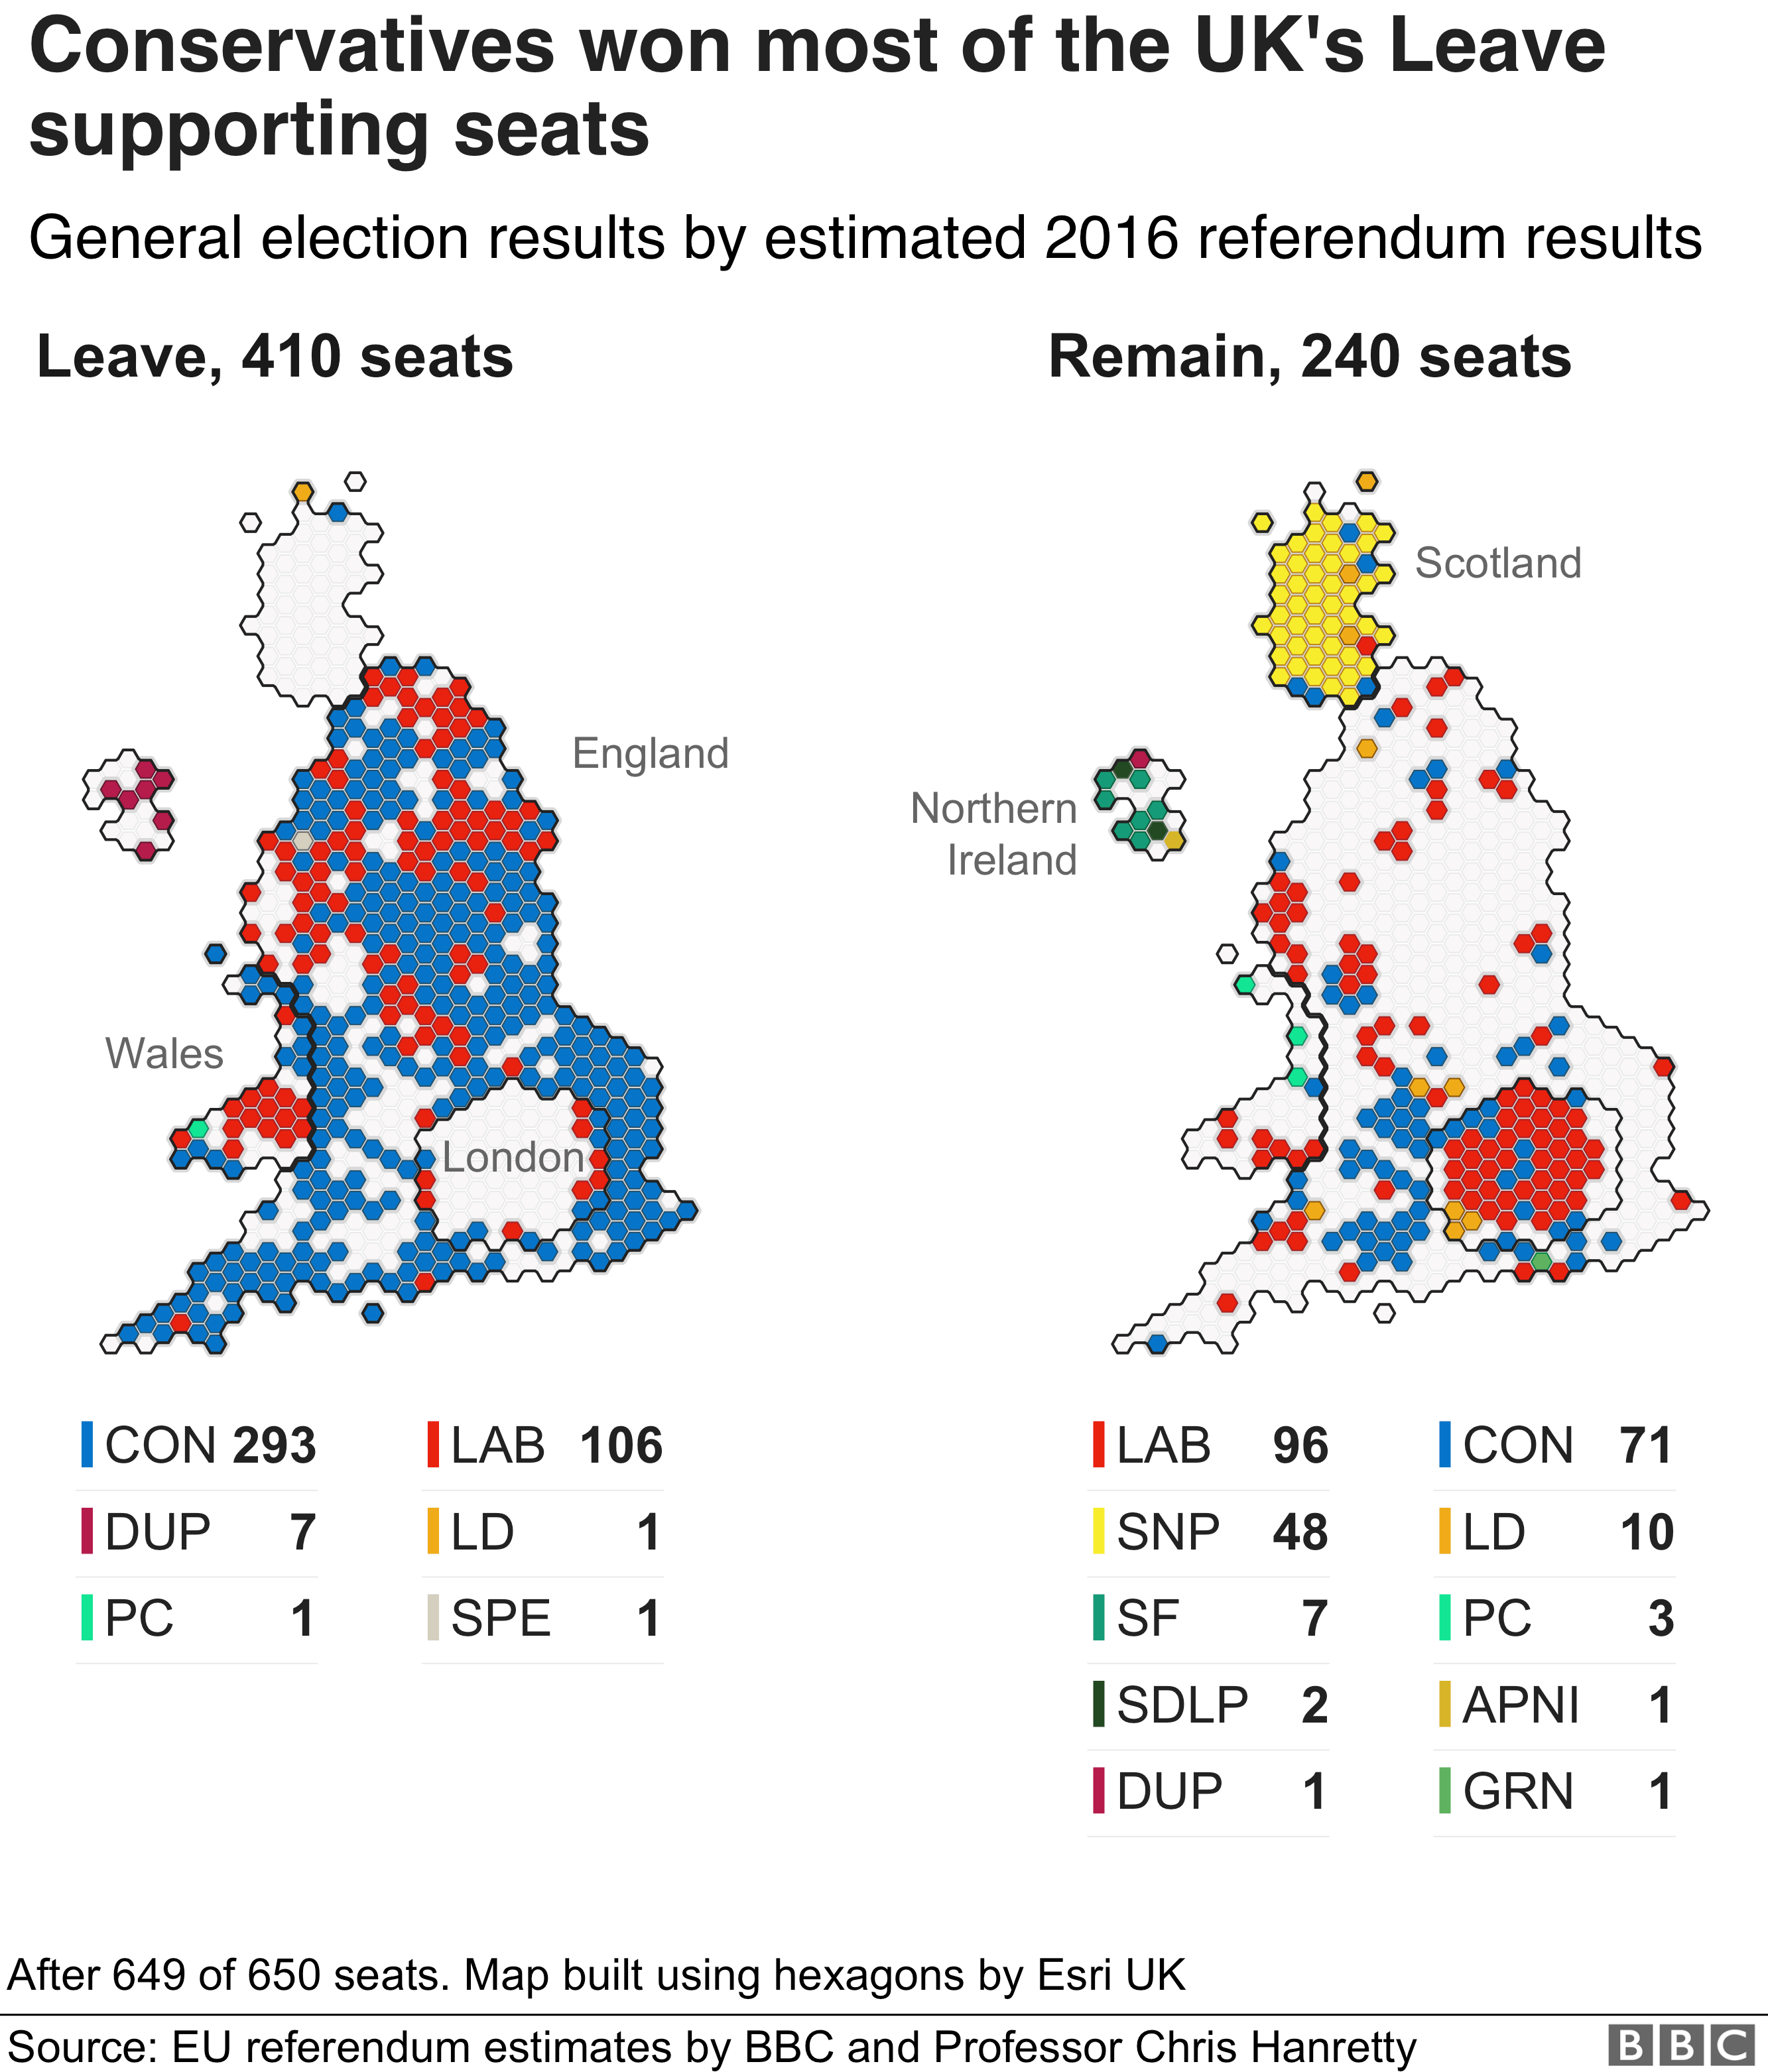 https://ichef.bbci.co.uk/news/624/cpsprodpb/17555/production/_110137559_optimised-results_by_eu_referendum_cartogram_640-nc.png